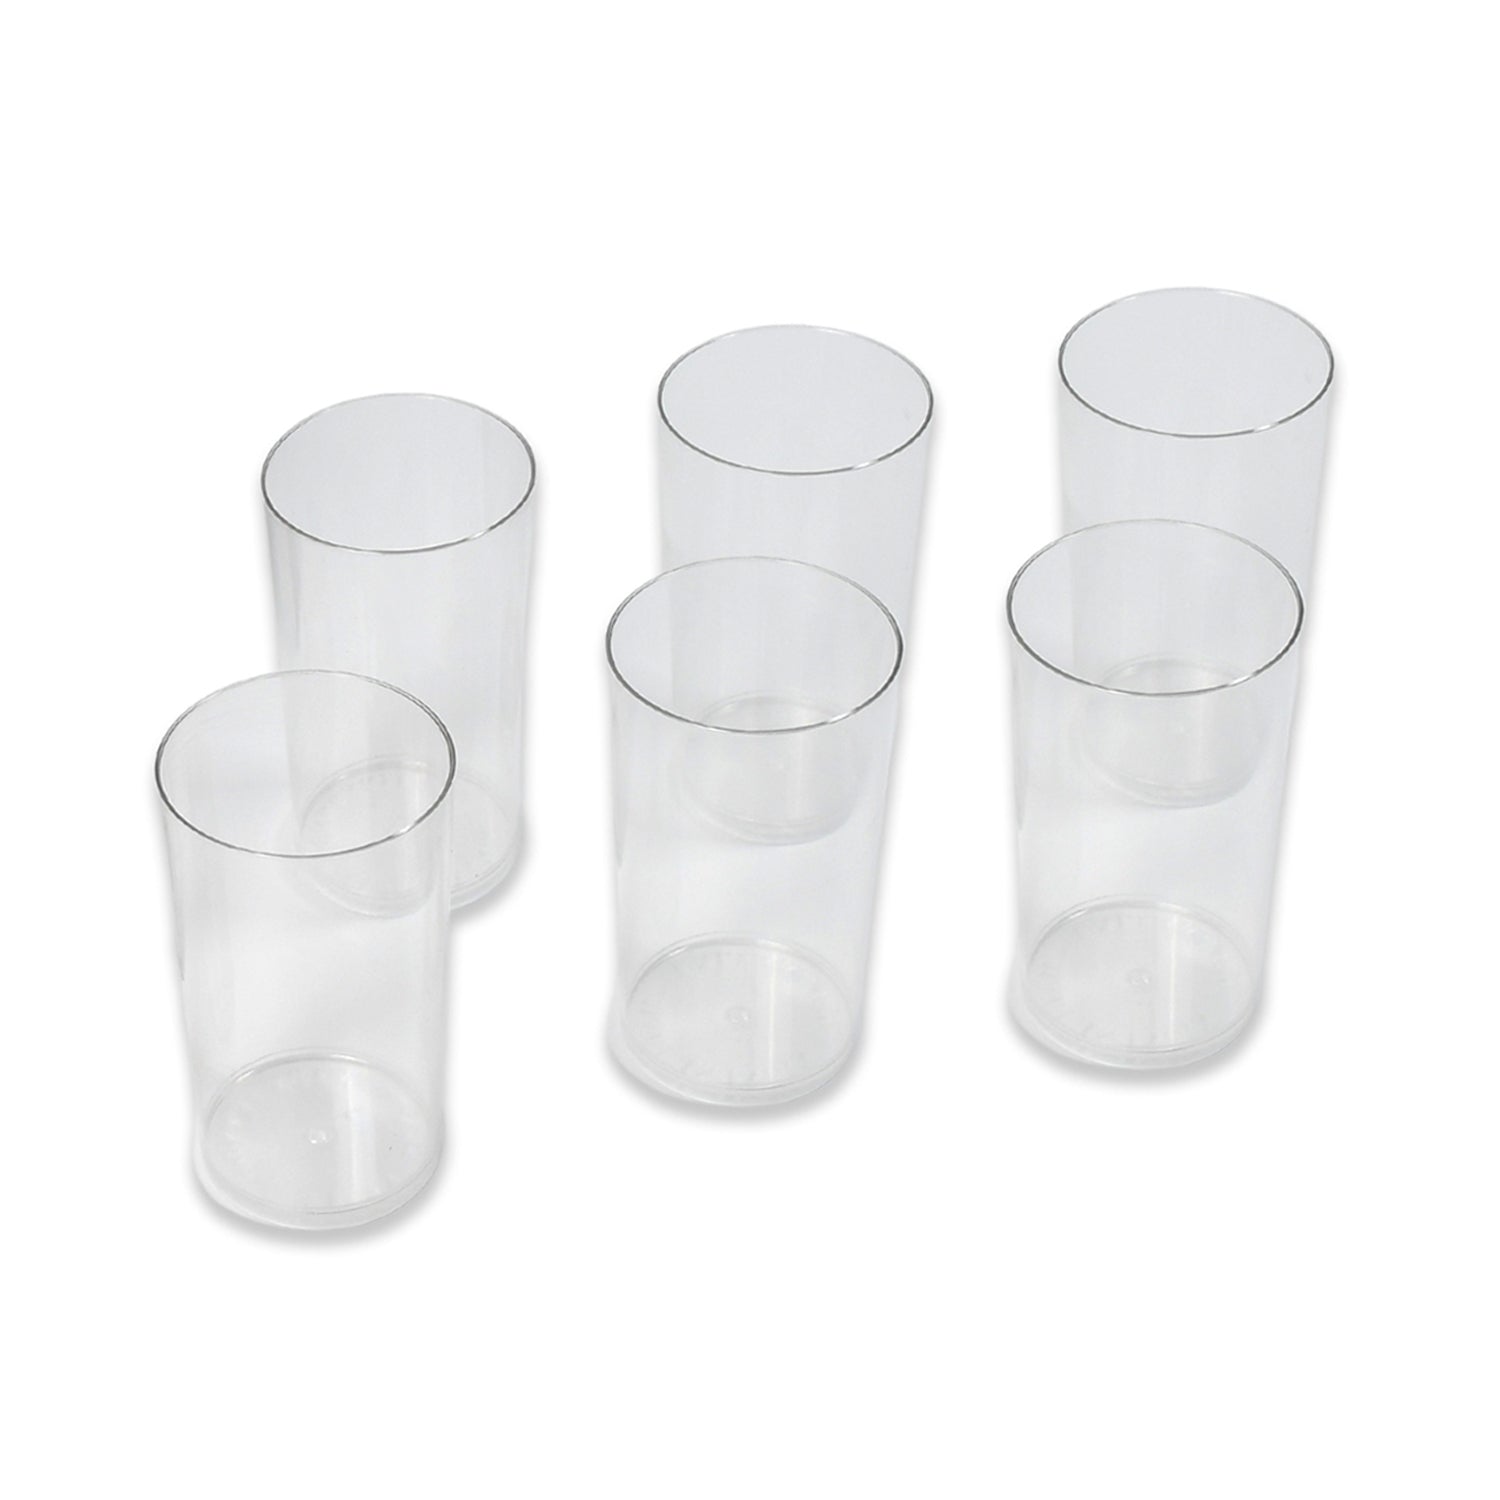 7143B Round Clear Plastic Water Glass Juice Beer Wine Plastic Unbreakable Transparent Glass Set ( 300ml 6pc ) (Brown Box) DeoDap